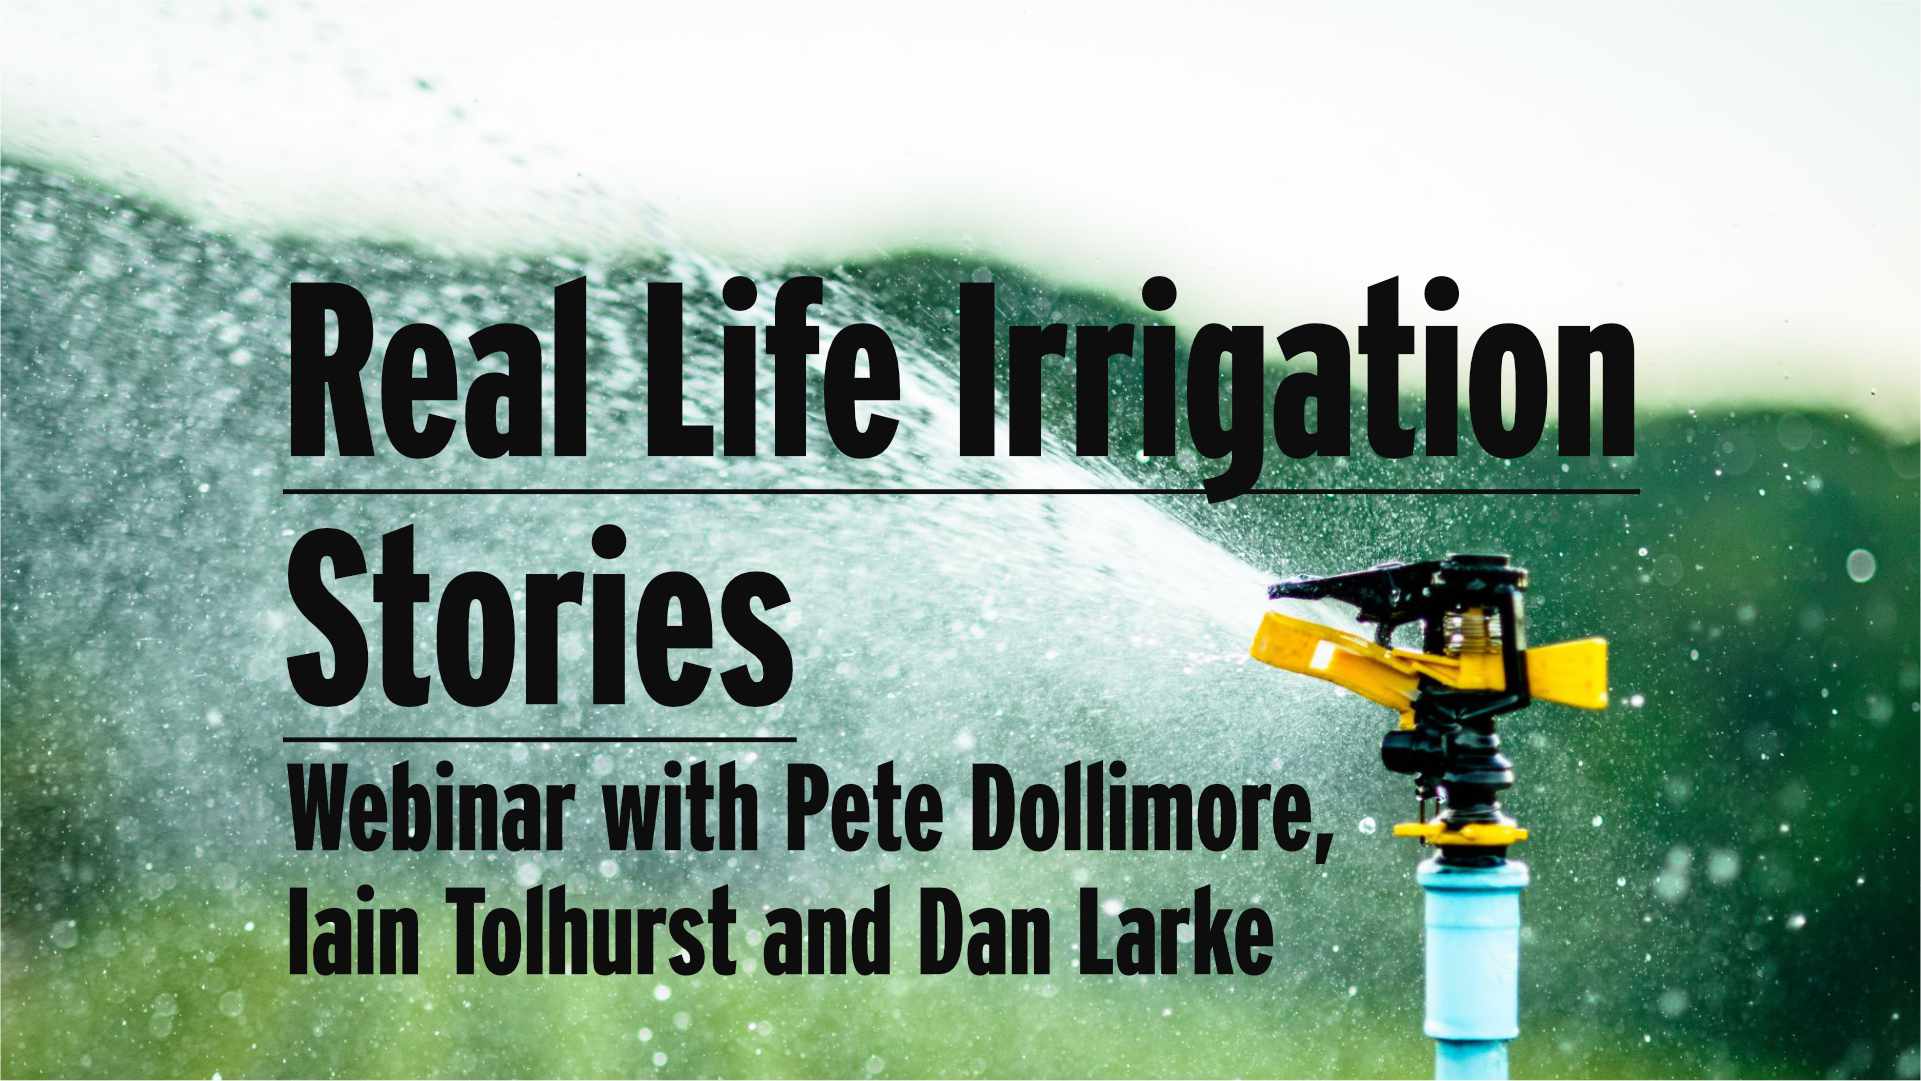 Real life irrigation stories - image